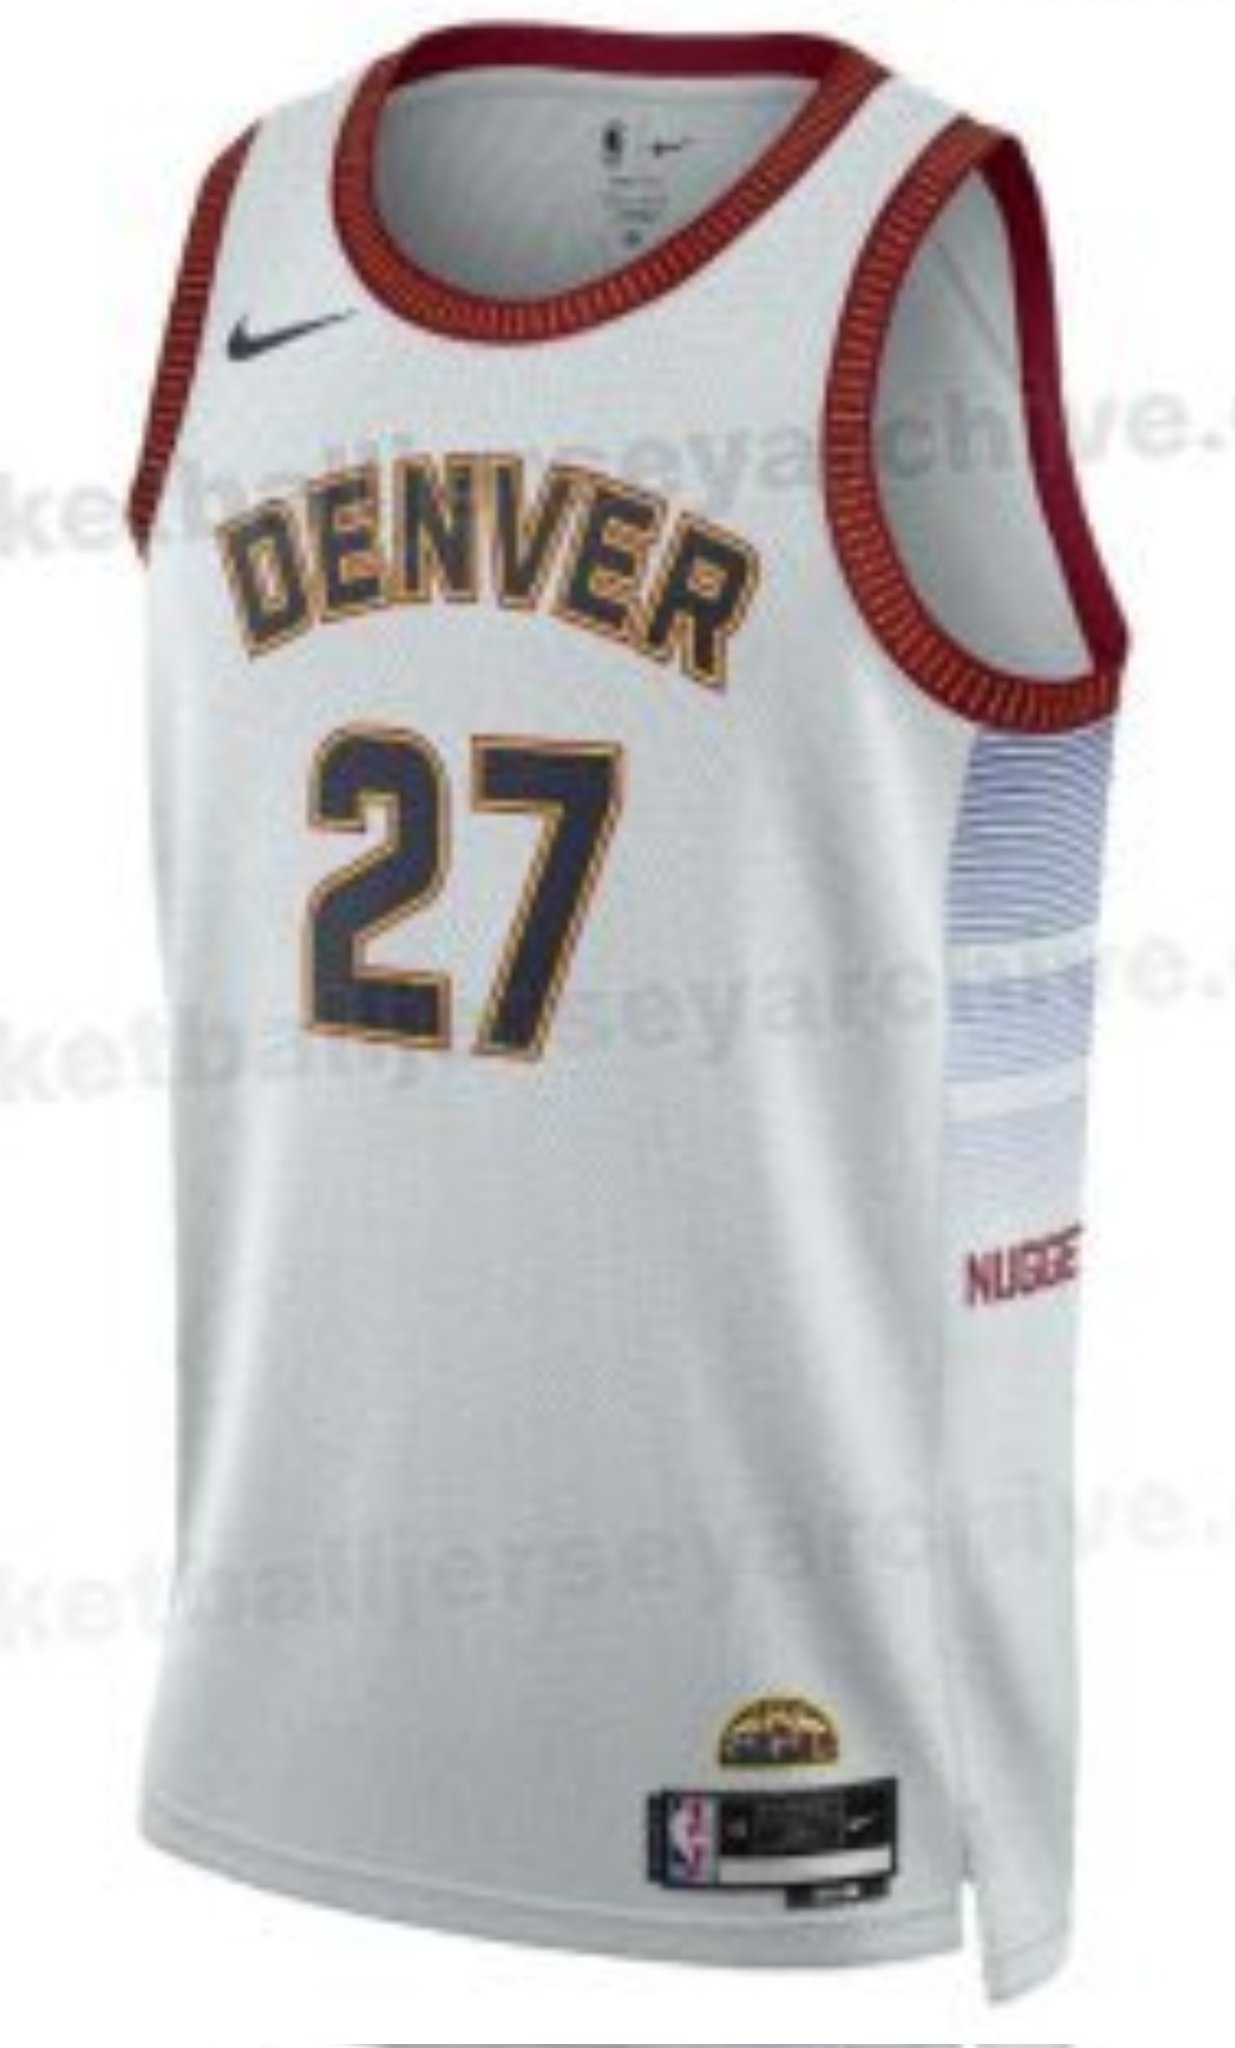 These leaked Denver Nuggets city jerseys looking a little too Los